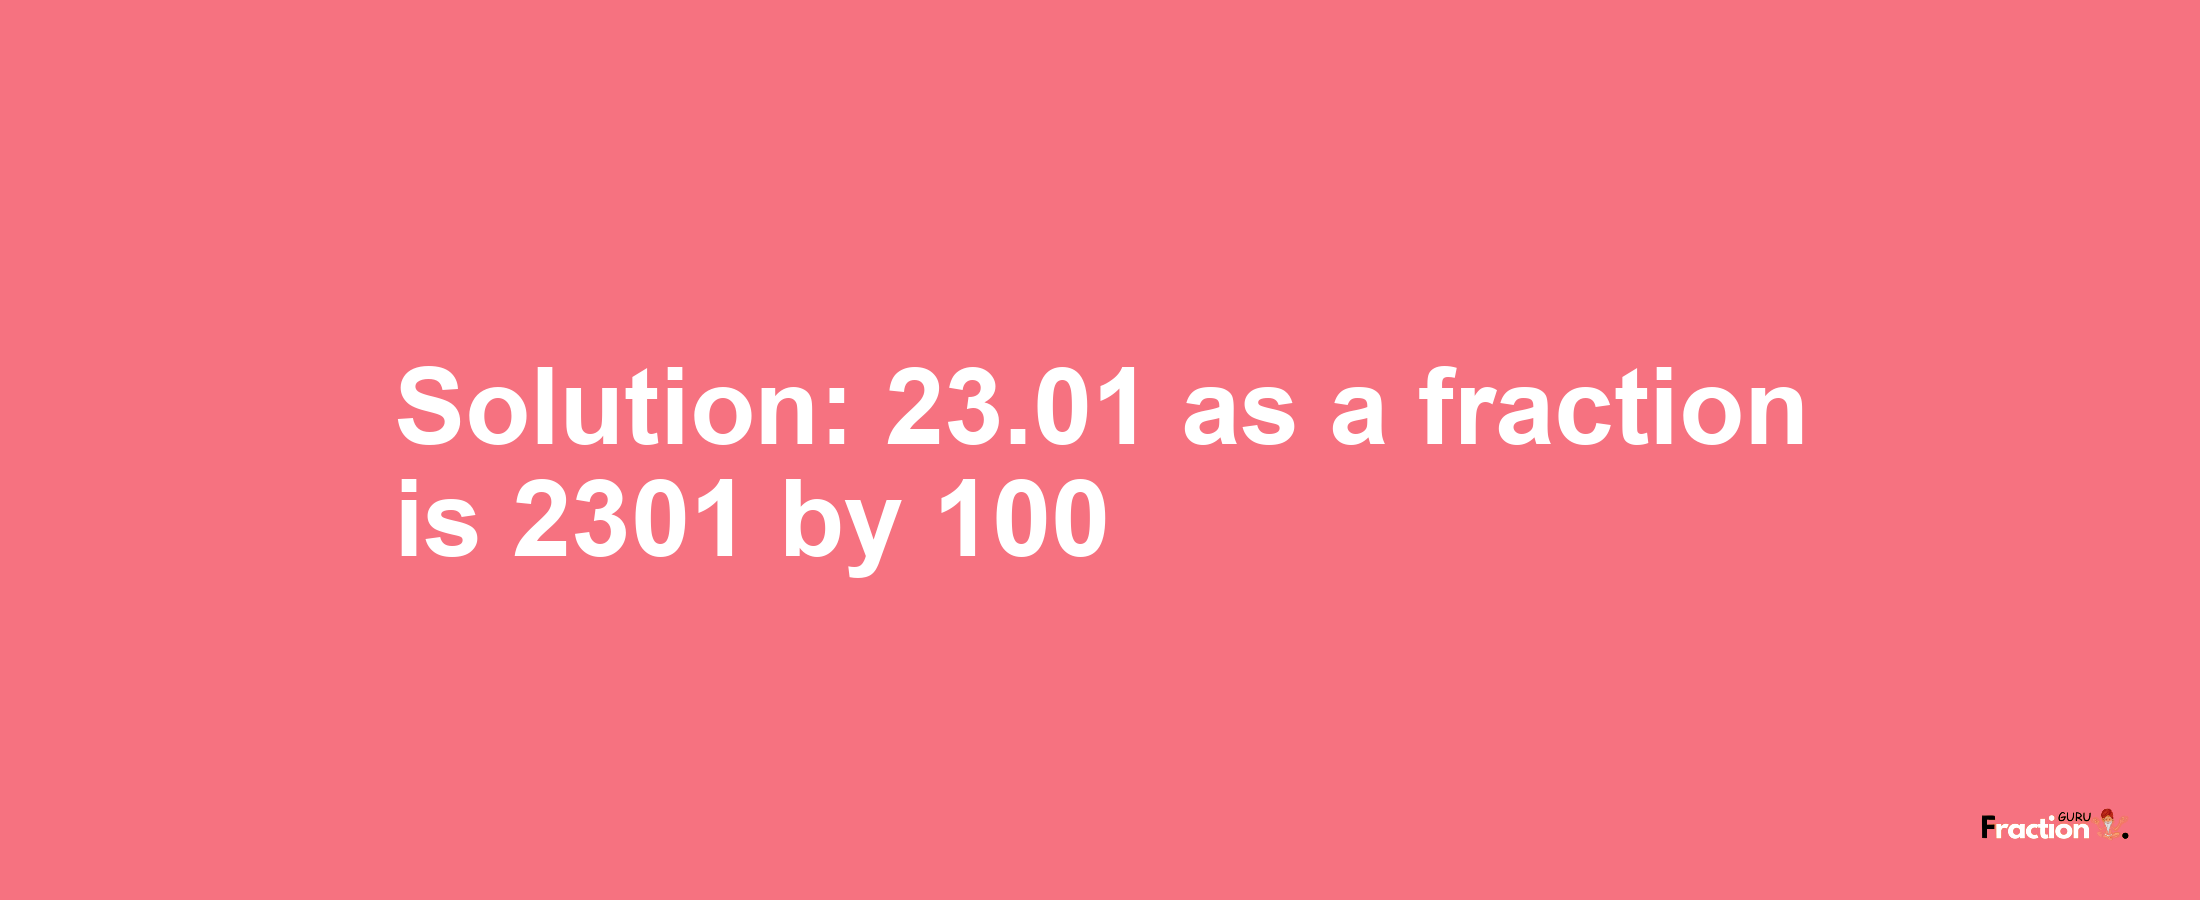 Solution:23.01 as a fraction is 2301/100